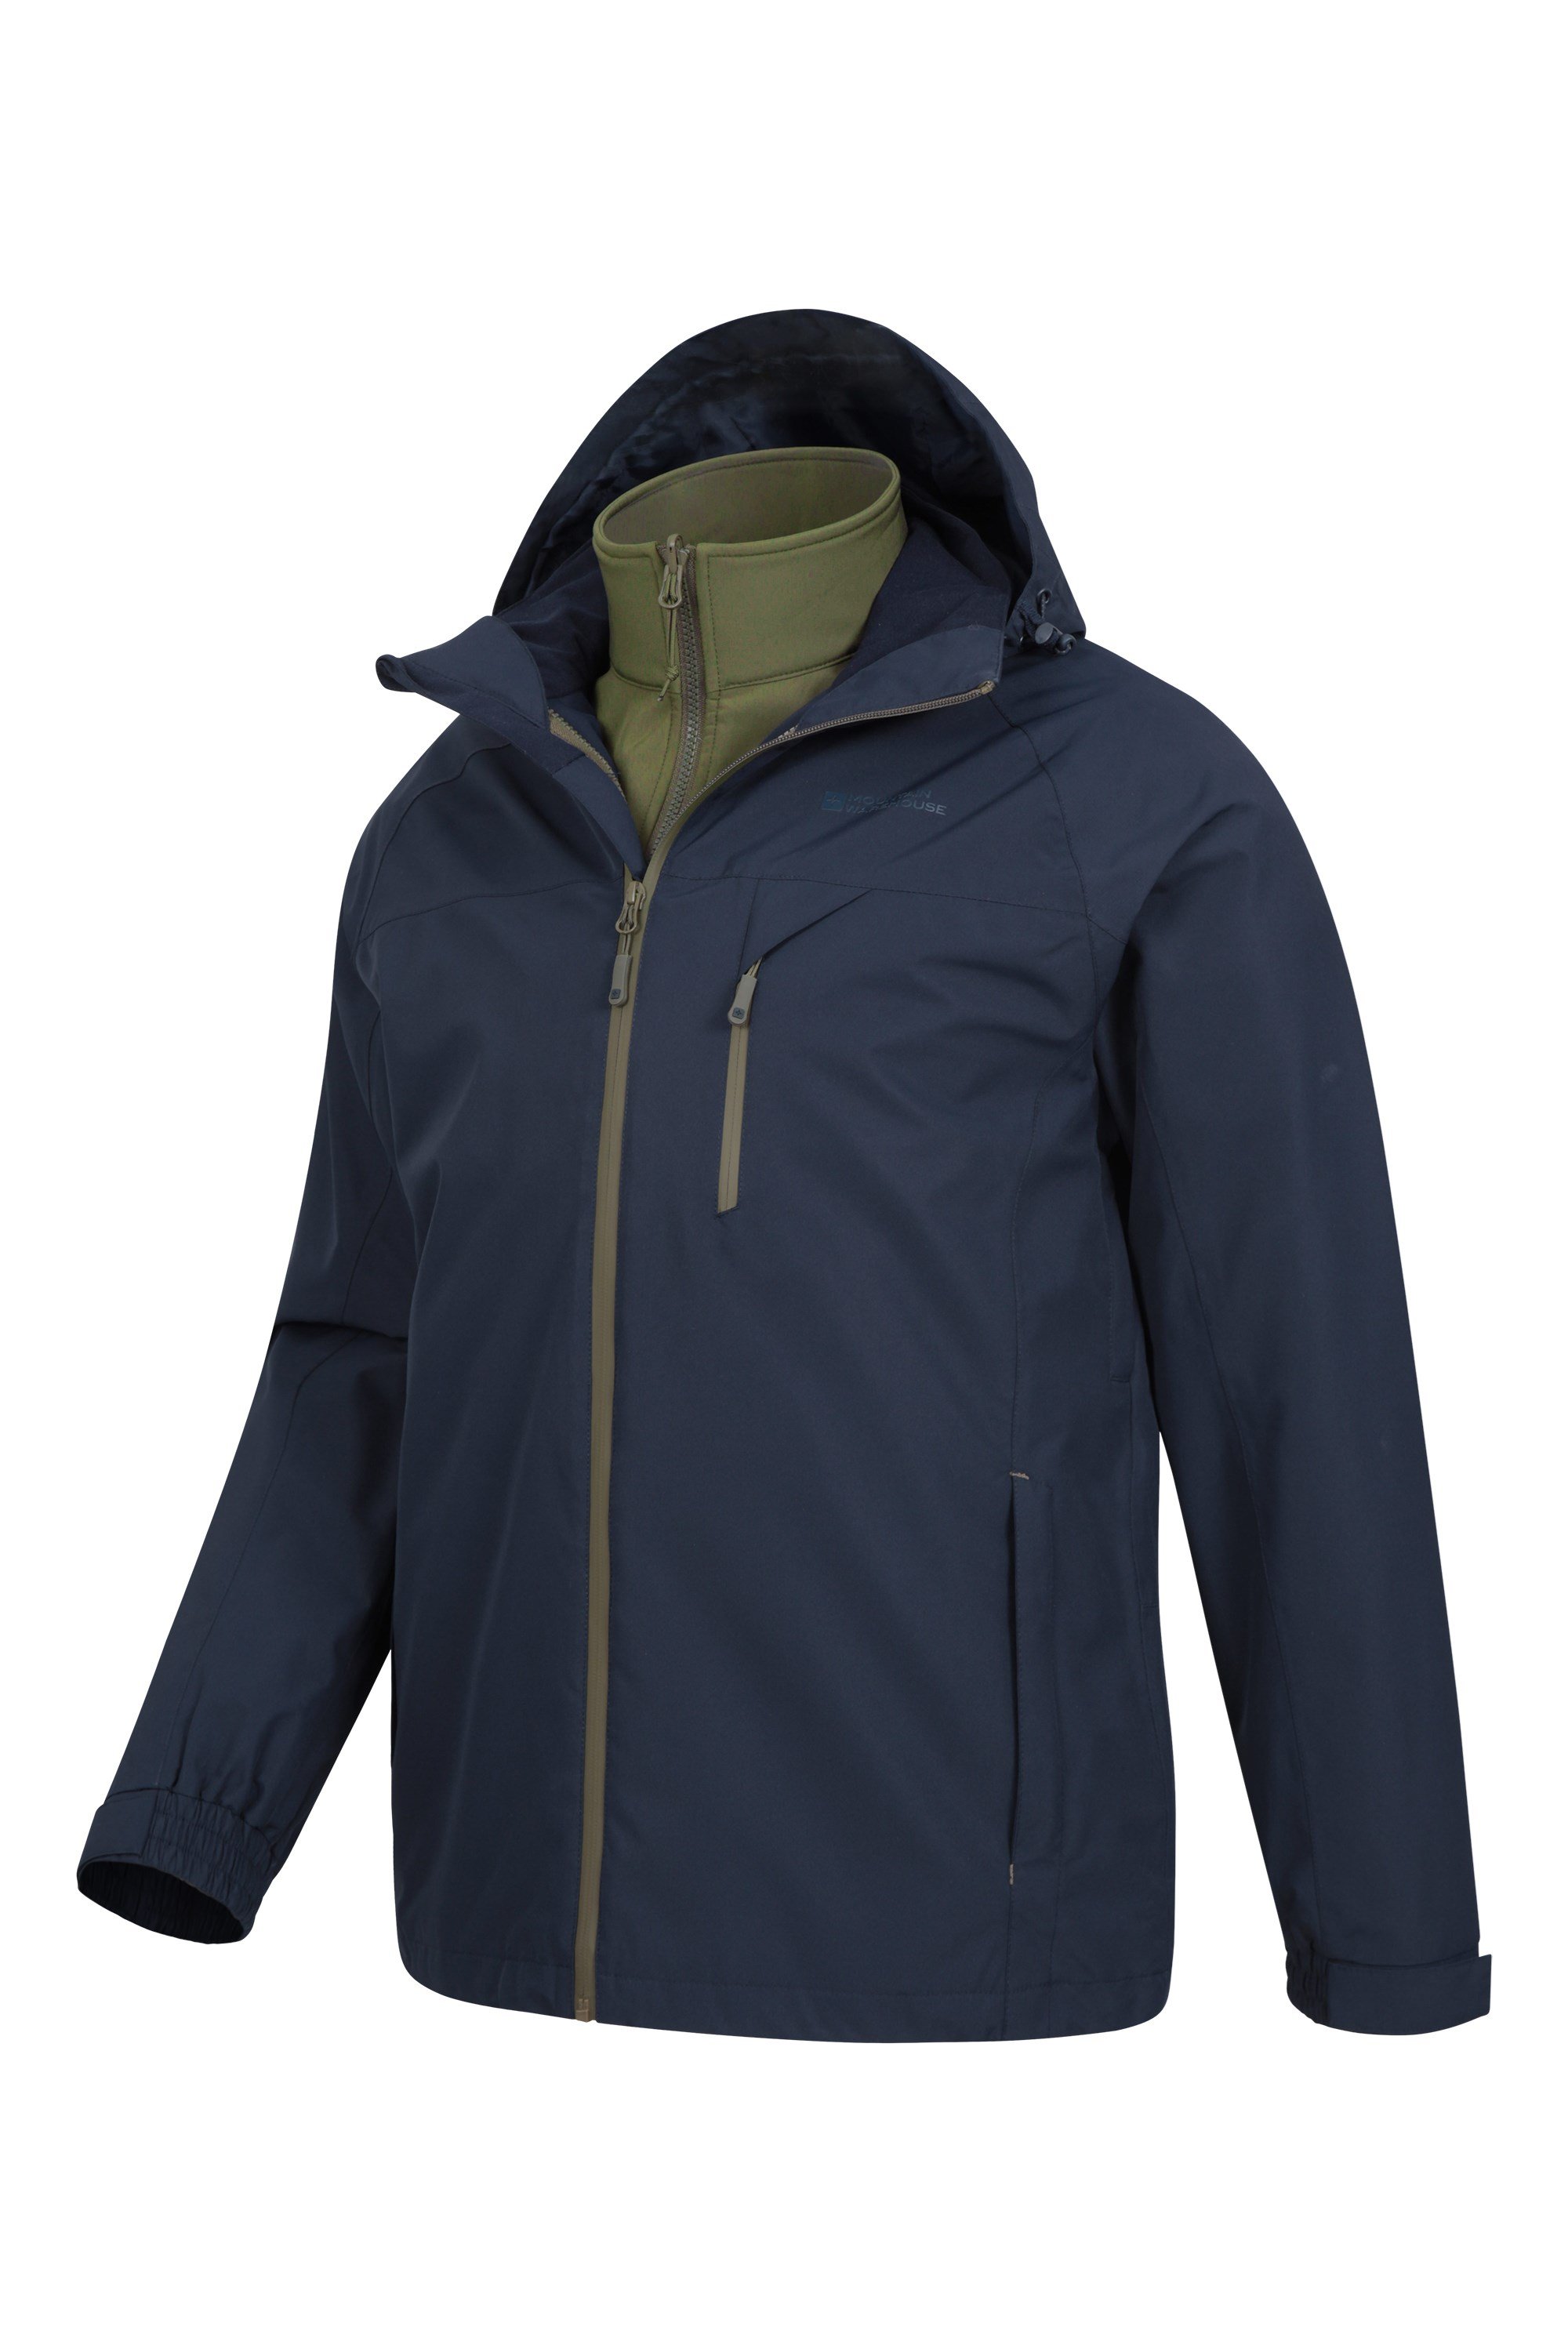 Brisk Extreme Mens 3-in-1 Waterproof Jacket | Mountain Warehouse US